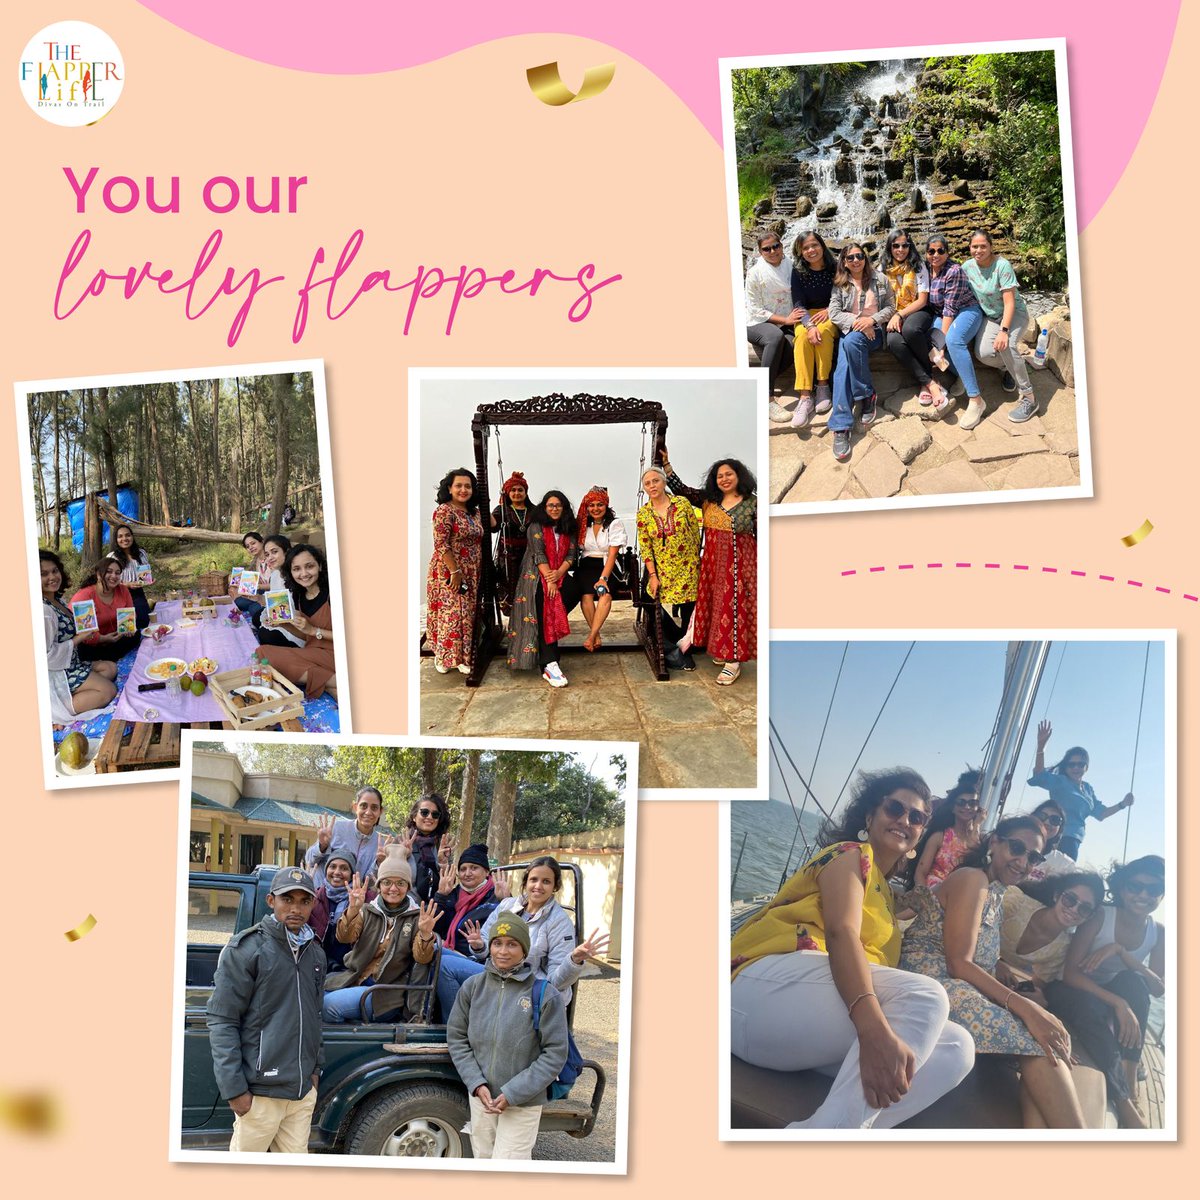 Here is best of our 6 years !

Our Founder Zinal Doshi's @DoshiZinal thoughts on the journey so far and we can’t wait to experience the journey ahead with our amazing community of Flappers. Swipe right to see the highs 😊

The celebrations have just began ! Stay Tuned !❤️